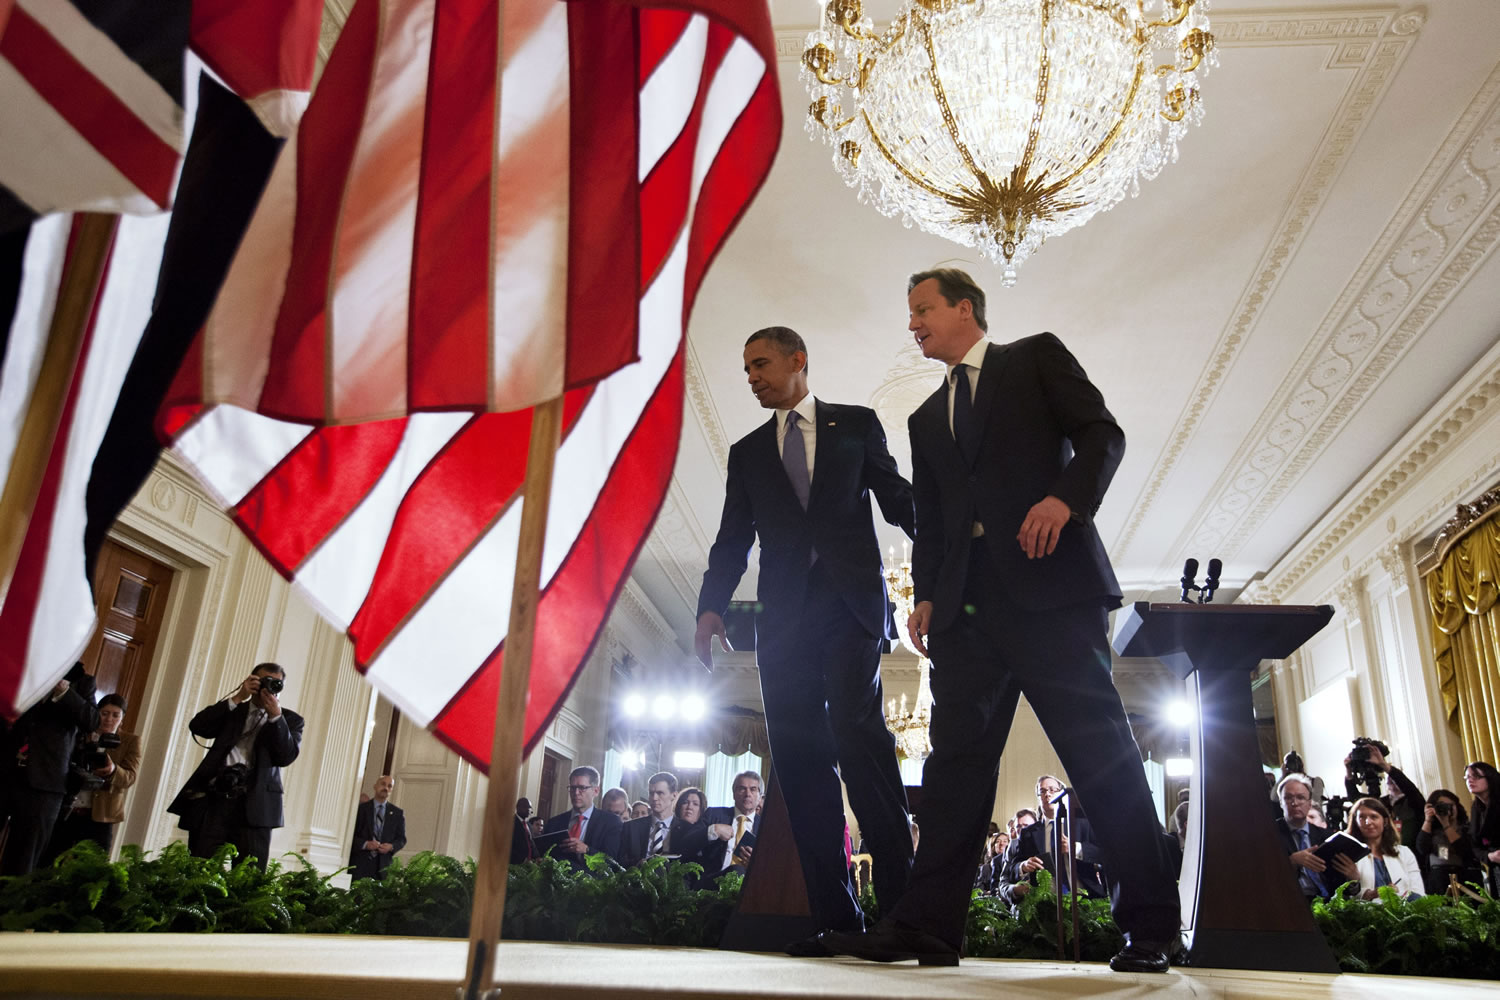 President Barack Obama and British Prime Minister David Cameron walk off the stage after their joint news conference Monday in the East Room of the White House in Washington, where they talked about various topics including Syria's civil war.